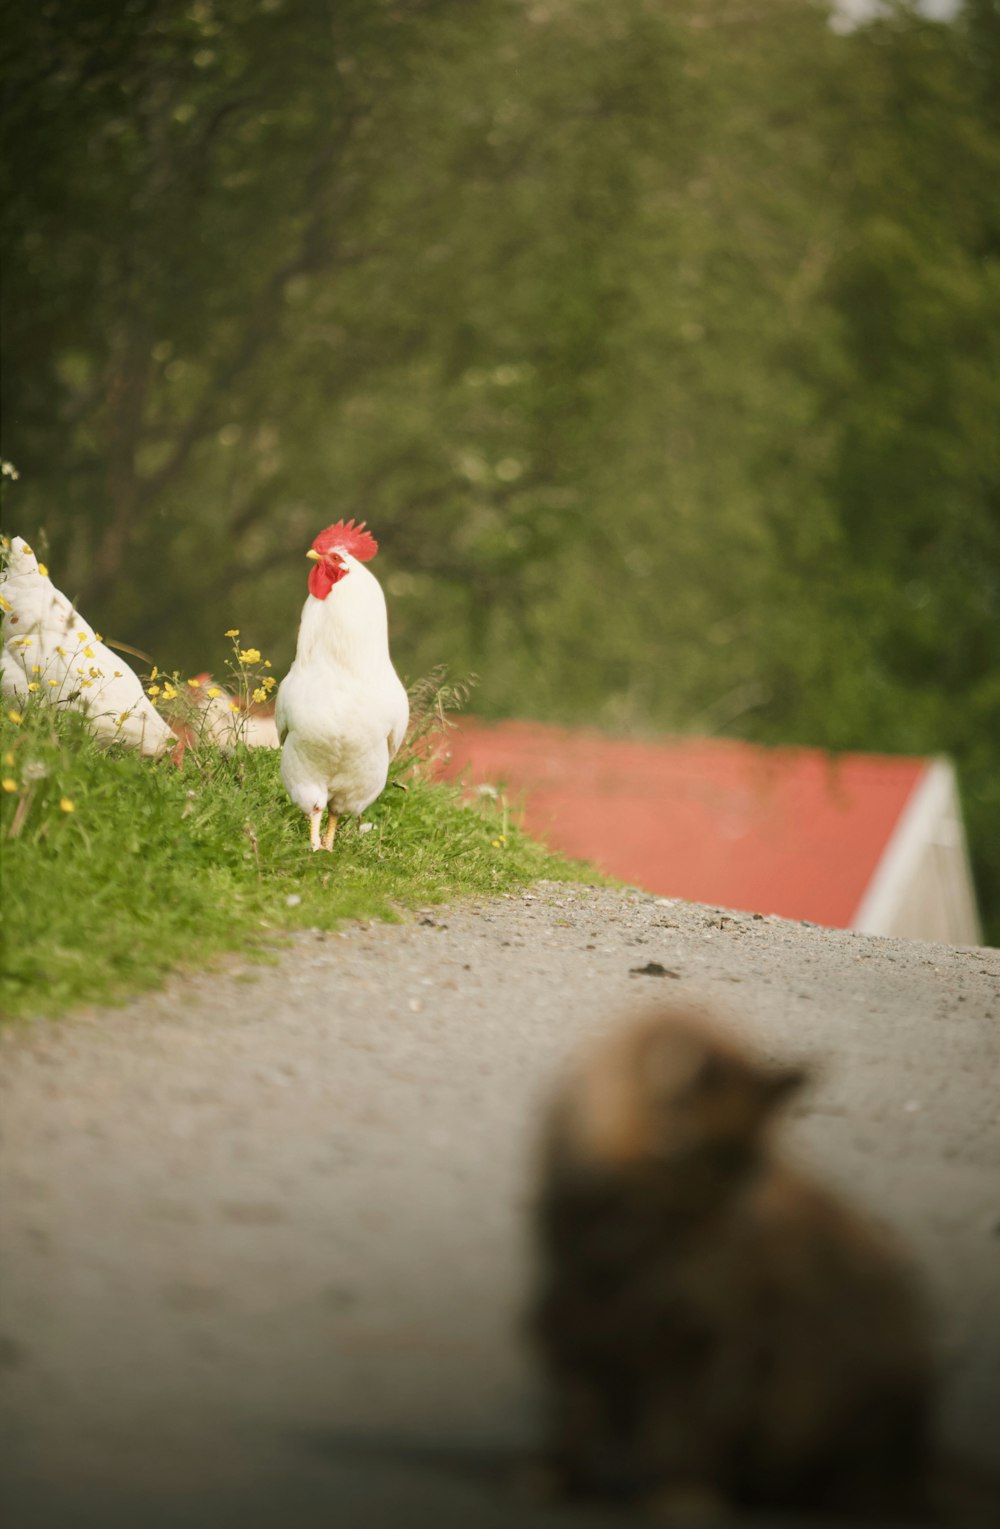 a cat sitting on the side of a road next to a chicken